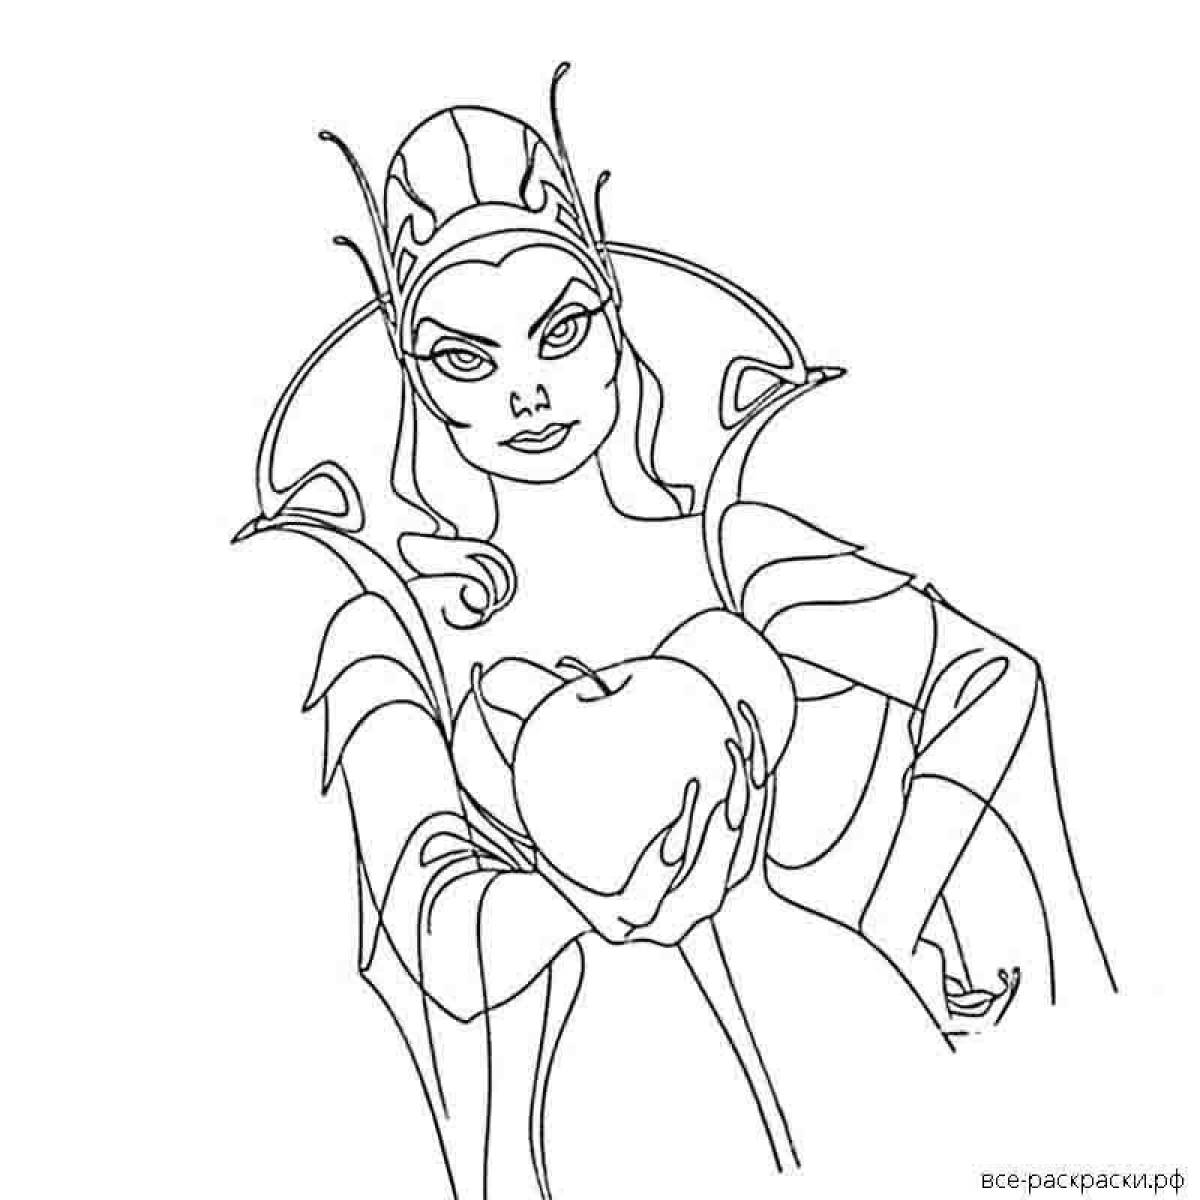 Charming maleficent coloring book